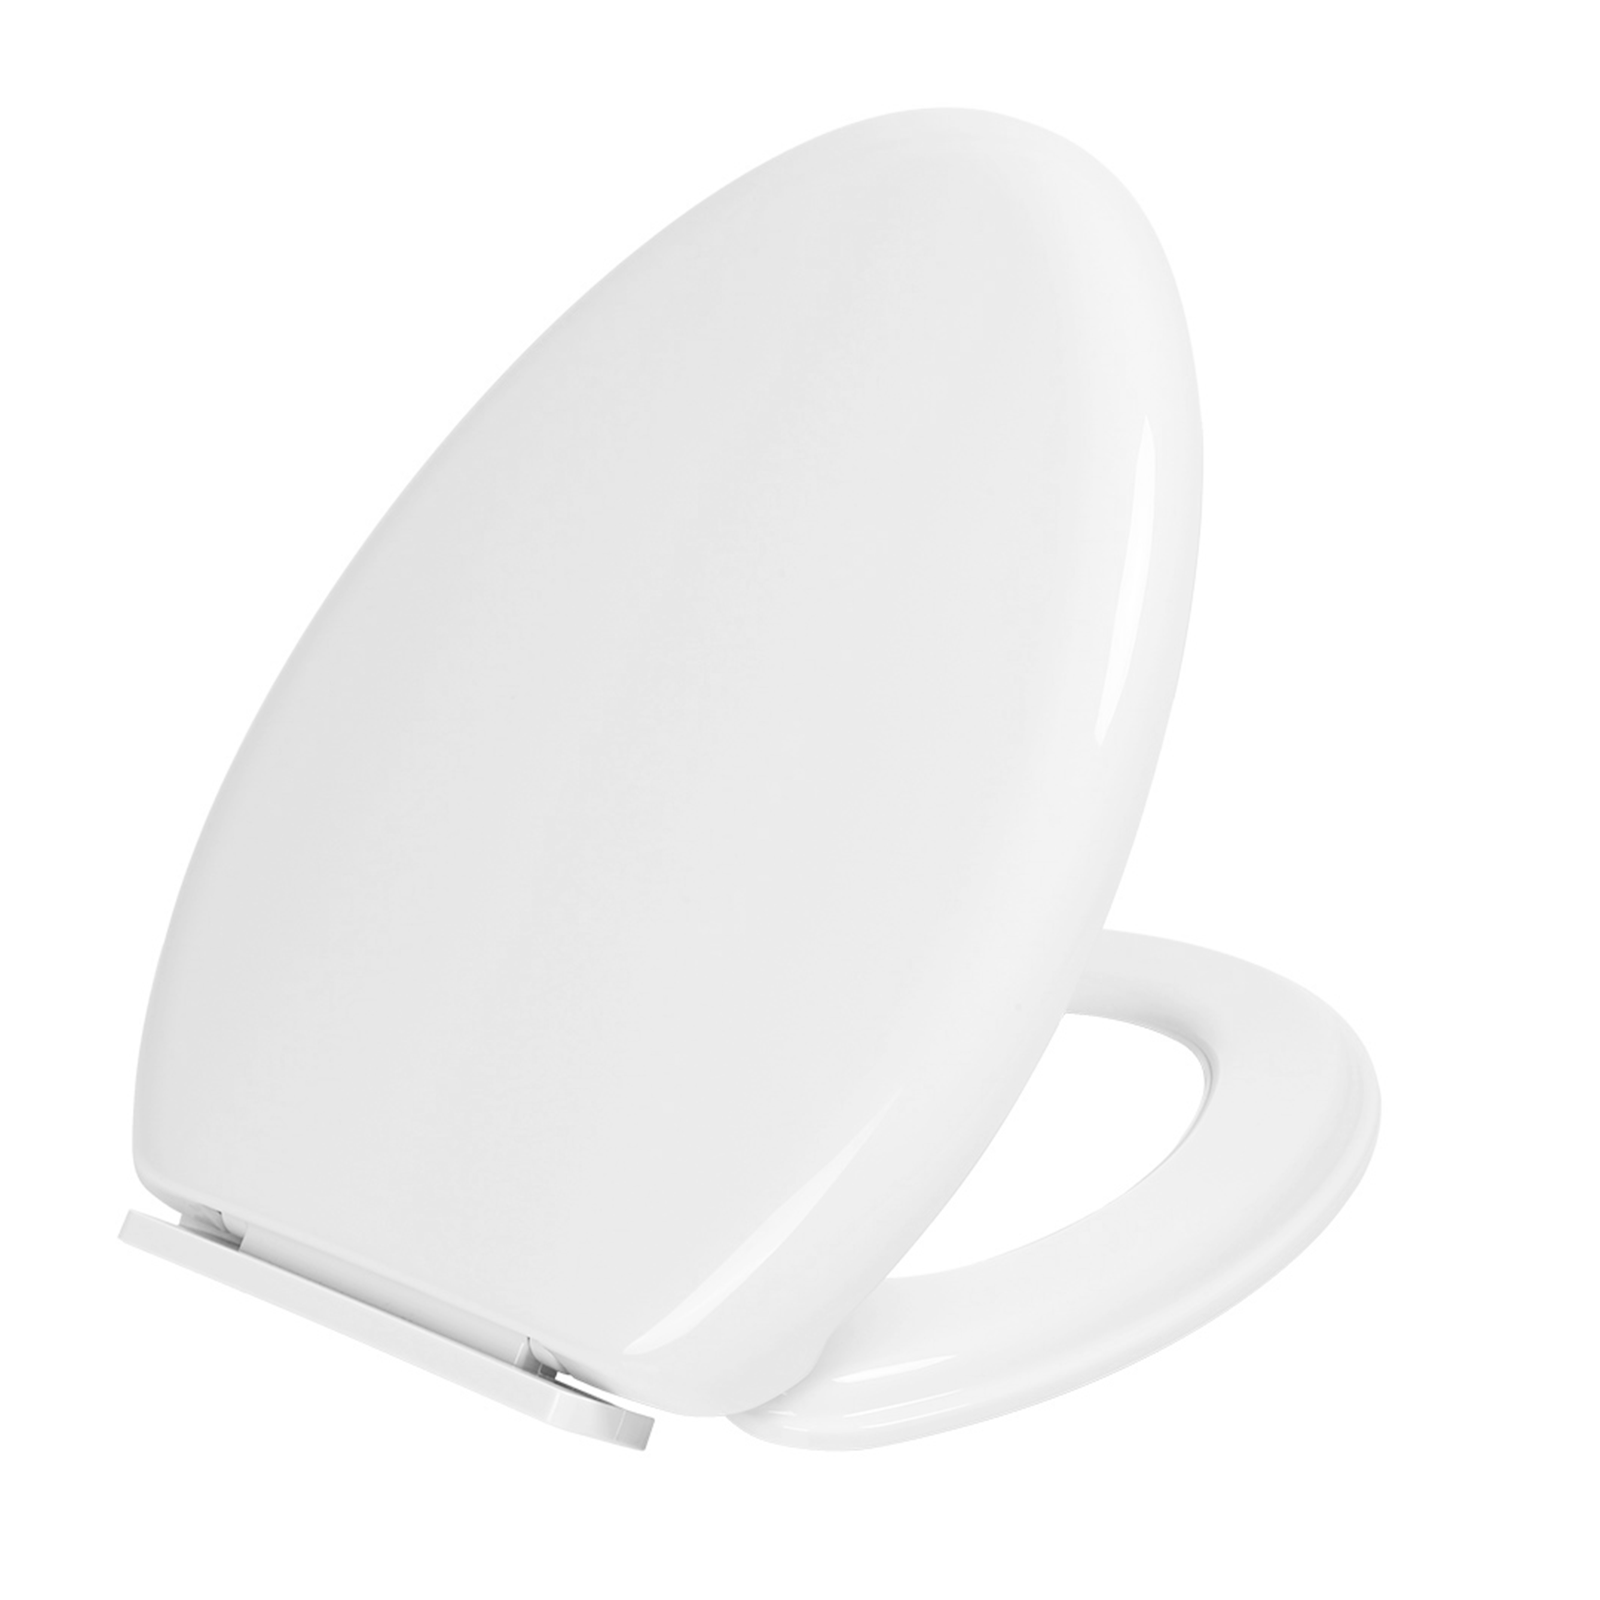 Miibox Removable Elongated Bowl White Toilet Seat, with Nonslip Grip-T